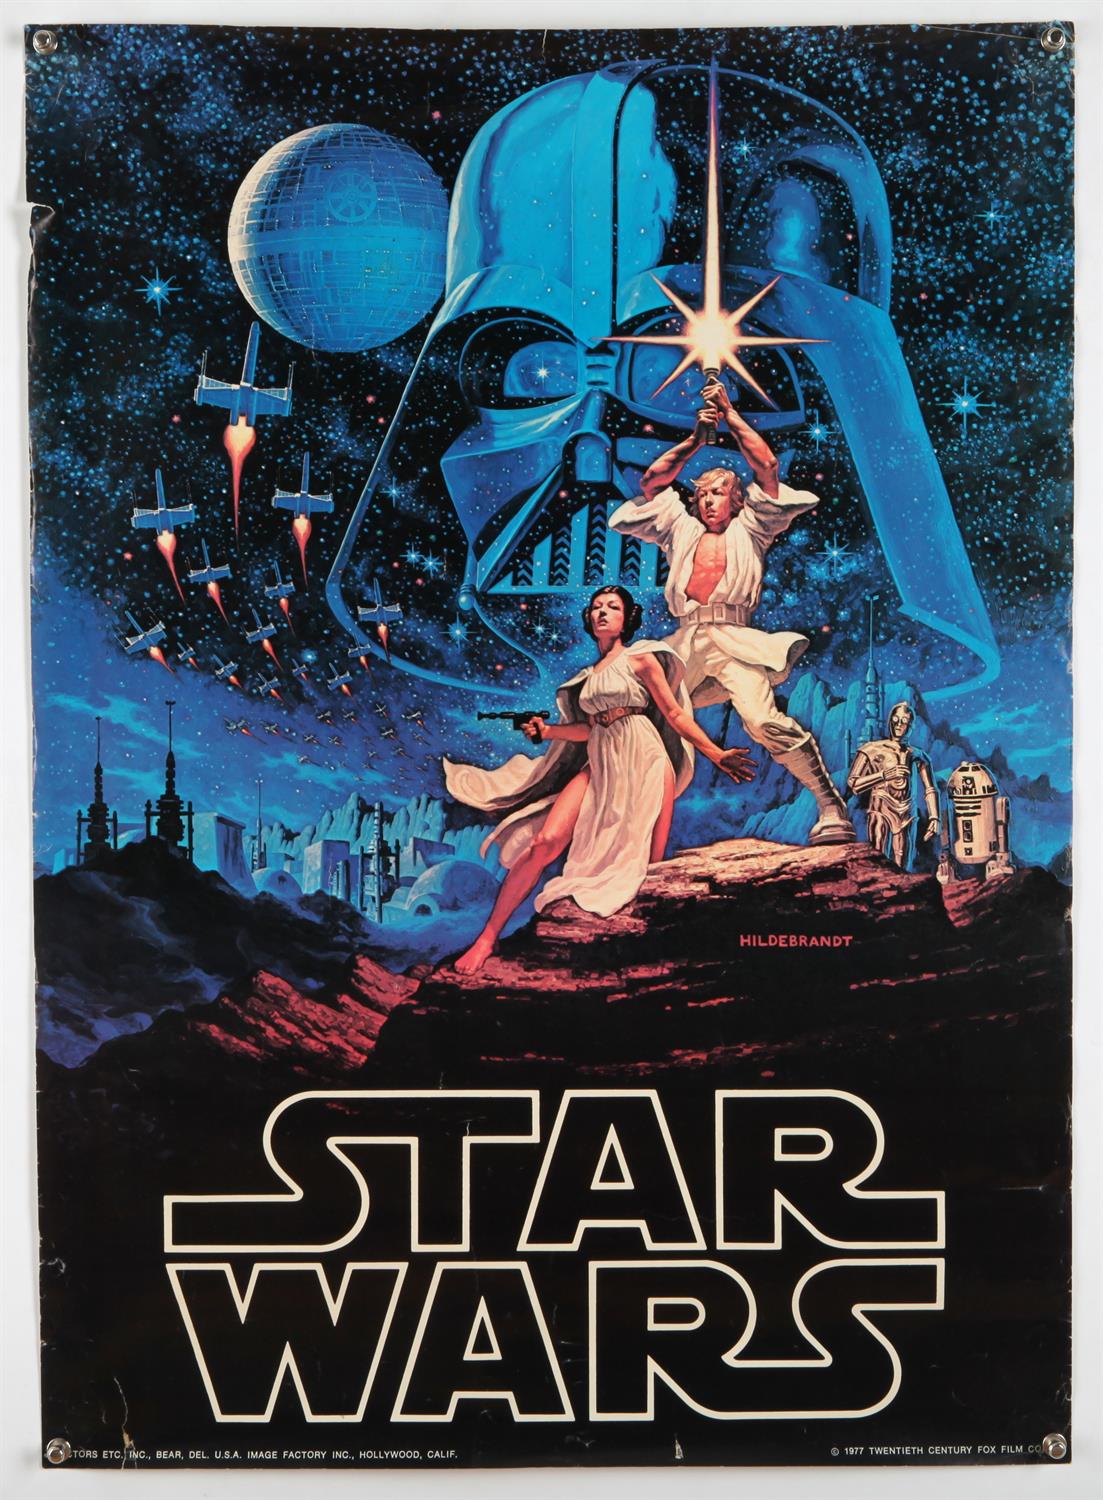 Star Wars (1977) Original Commercial poster with artwork by the Hildebrandt brothers, rolled,